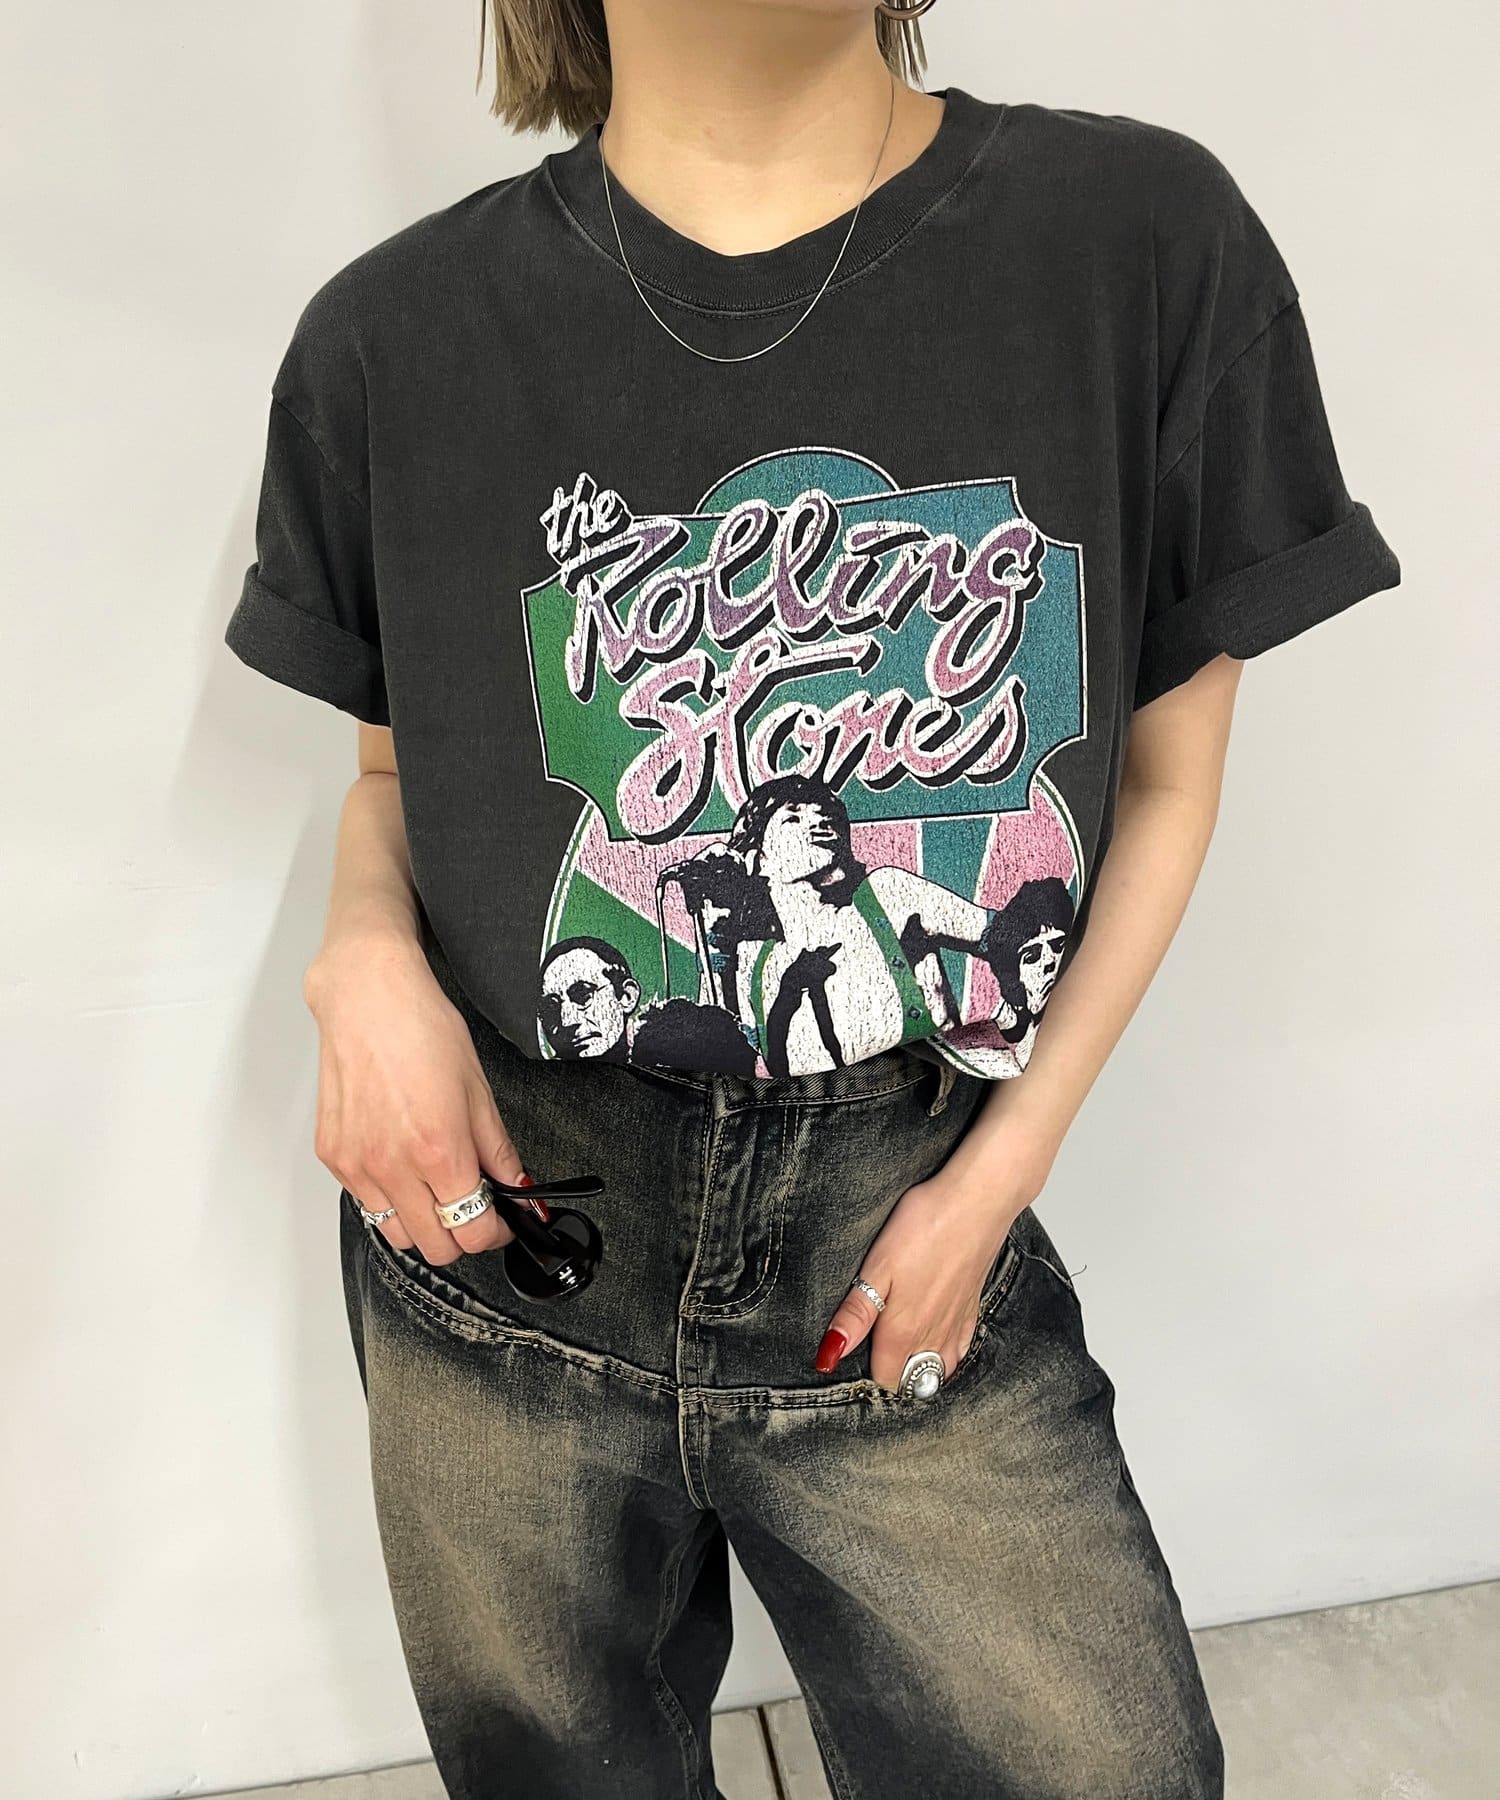 WHO’S WHO gallery(フーズフーギャラリー) ヴィンテージライクROCK TEE